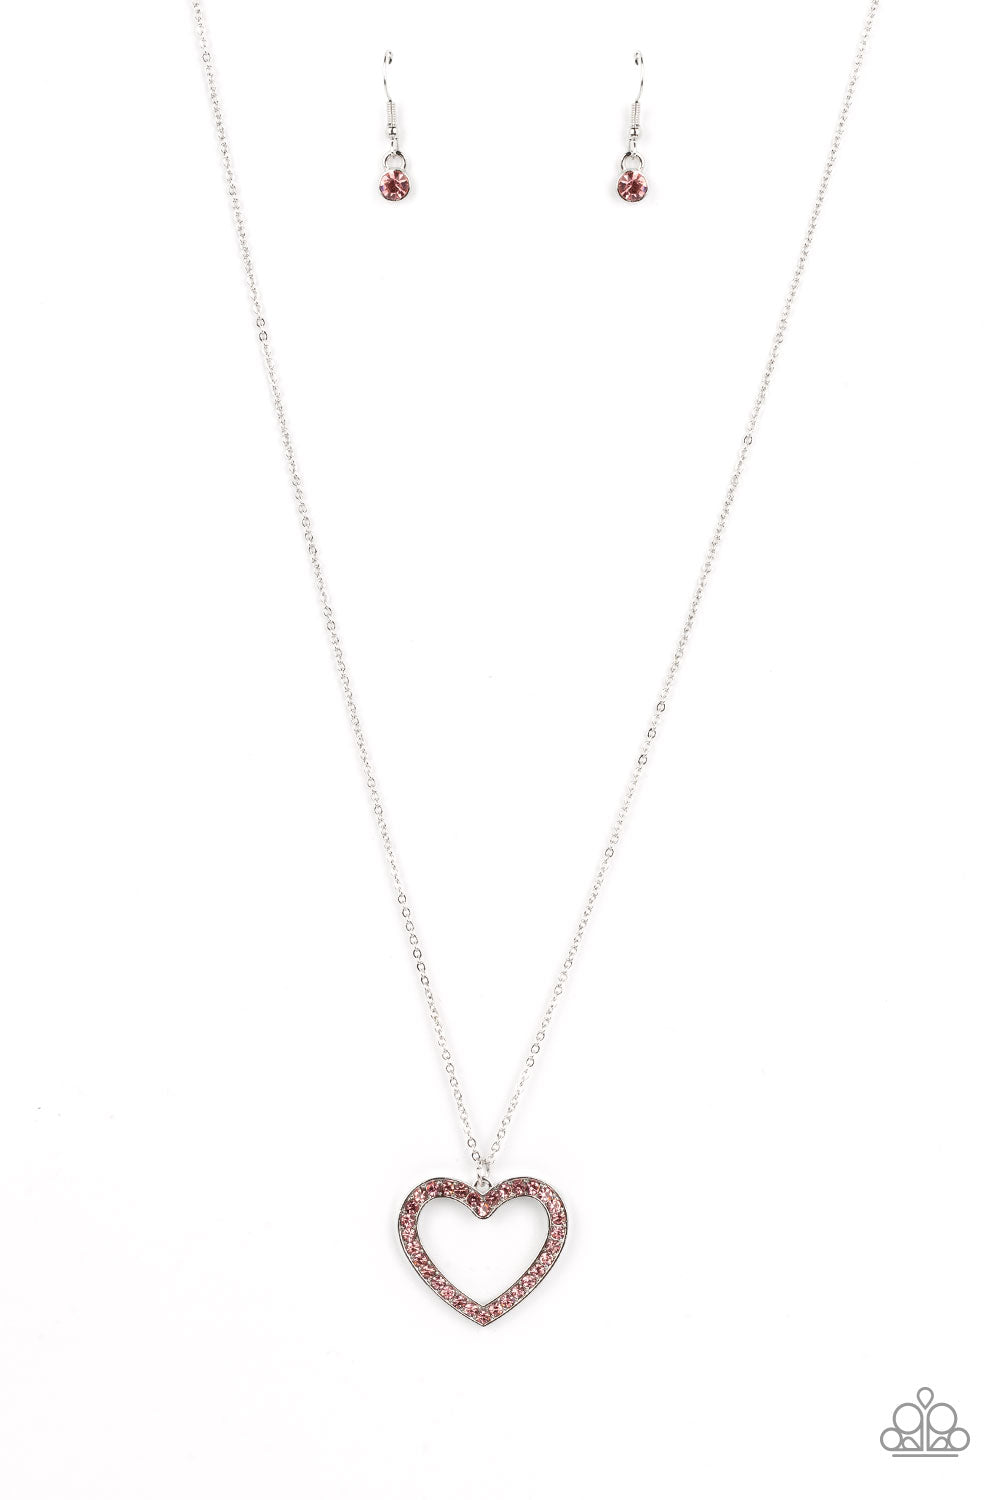 Dainty Darling Necklace__Pink